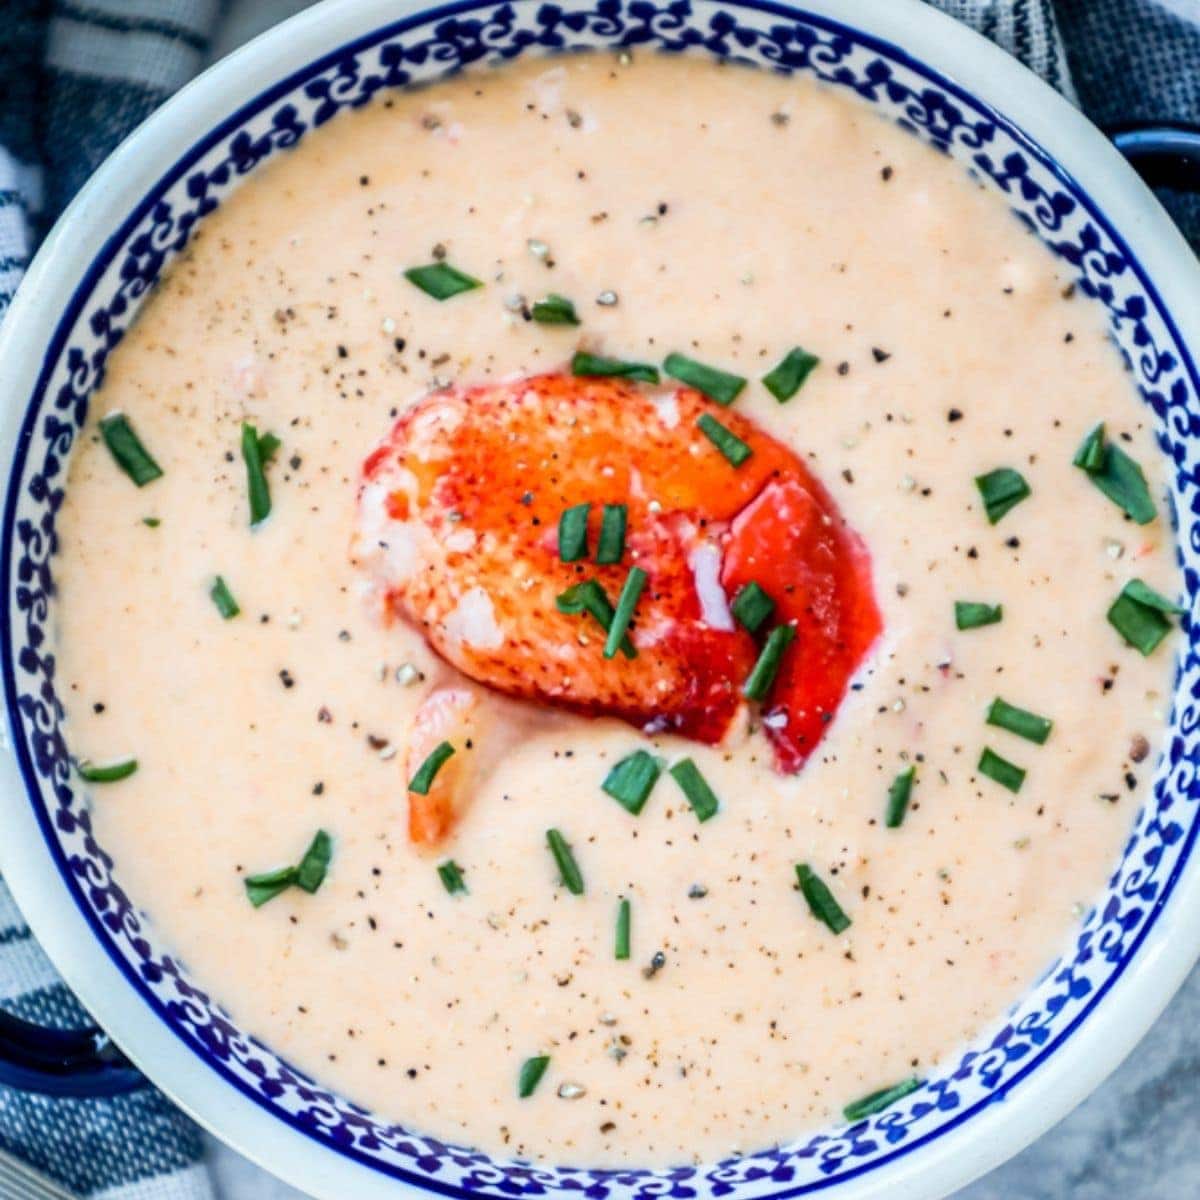 https://sweetcsdesigns.com/wp-content/uploads/2020/01/lobster-bisque-Recipe-Picture.jpg